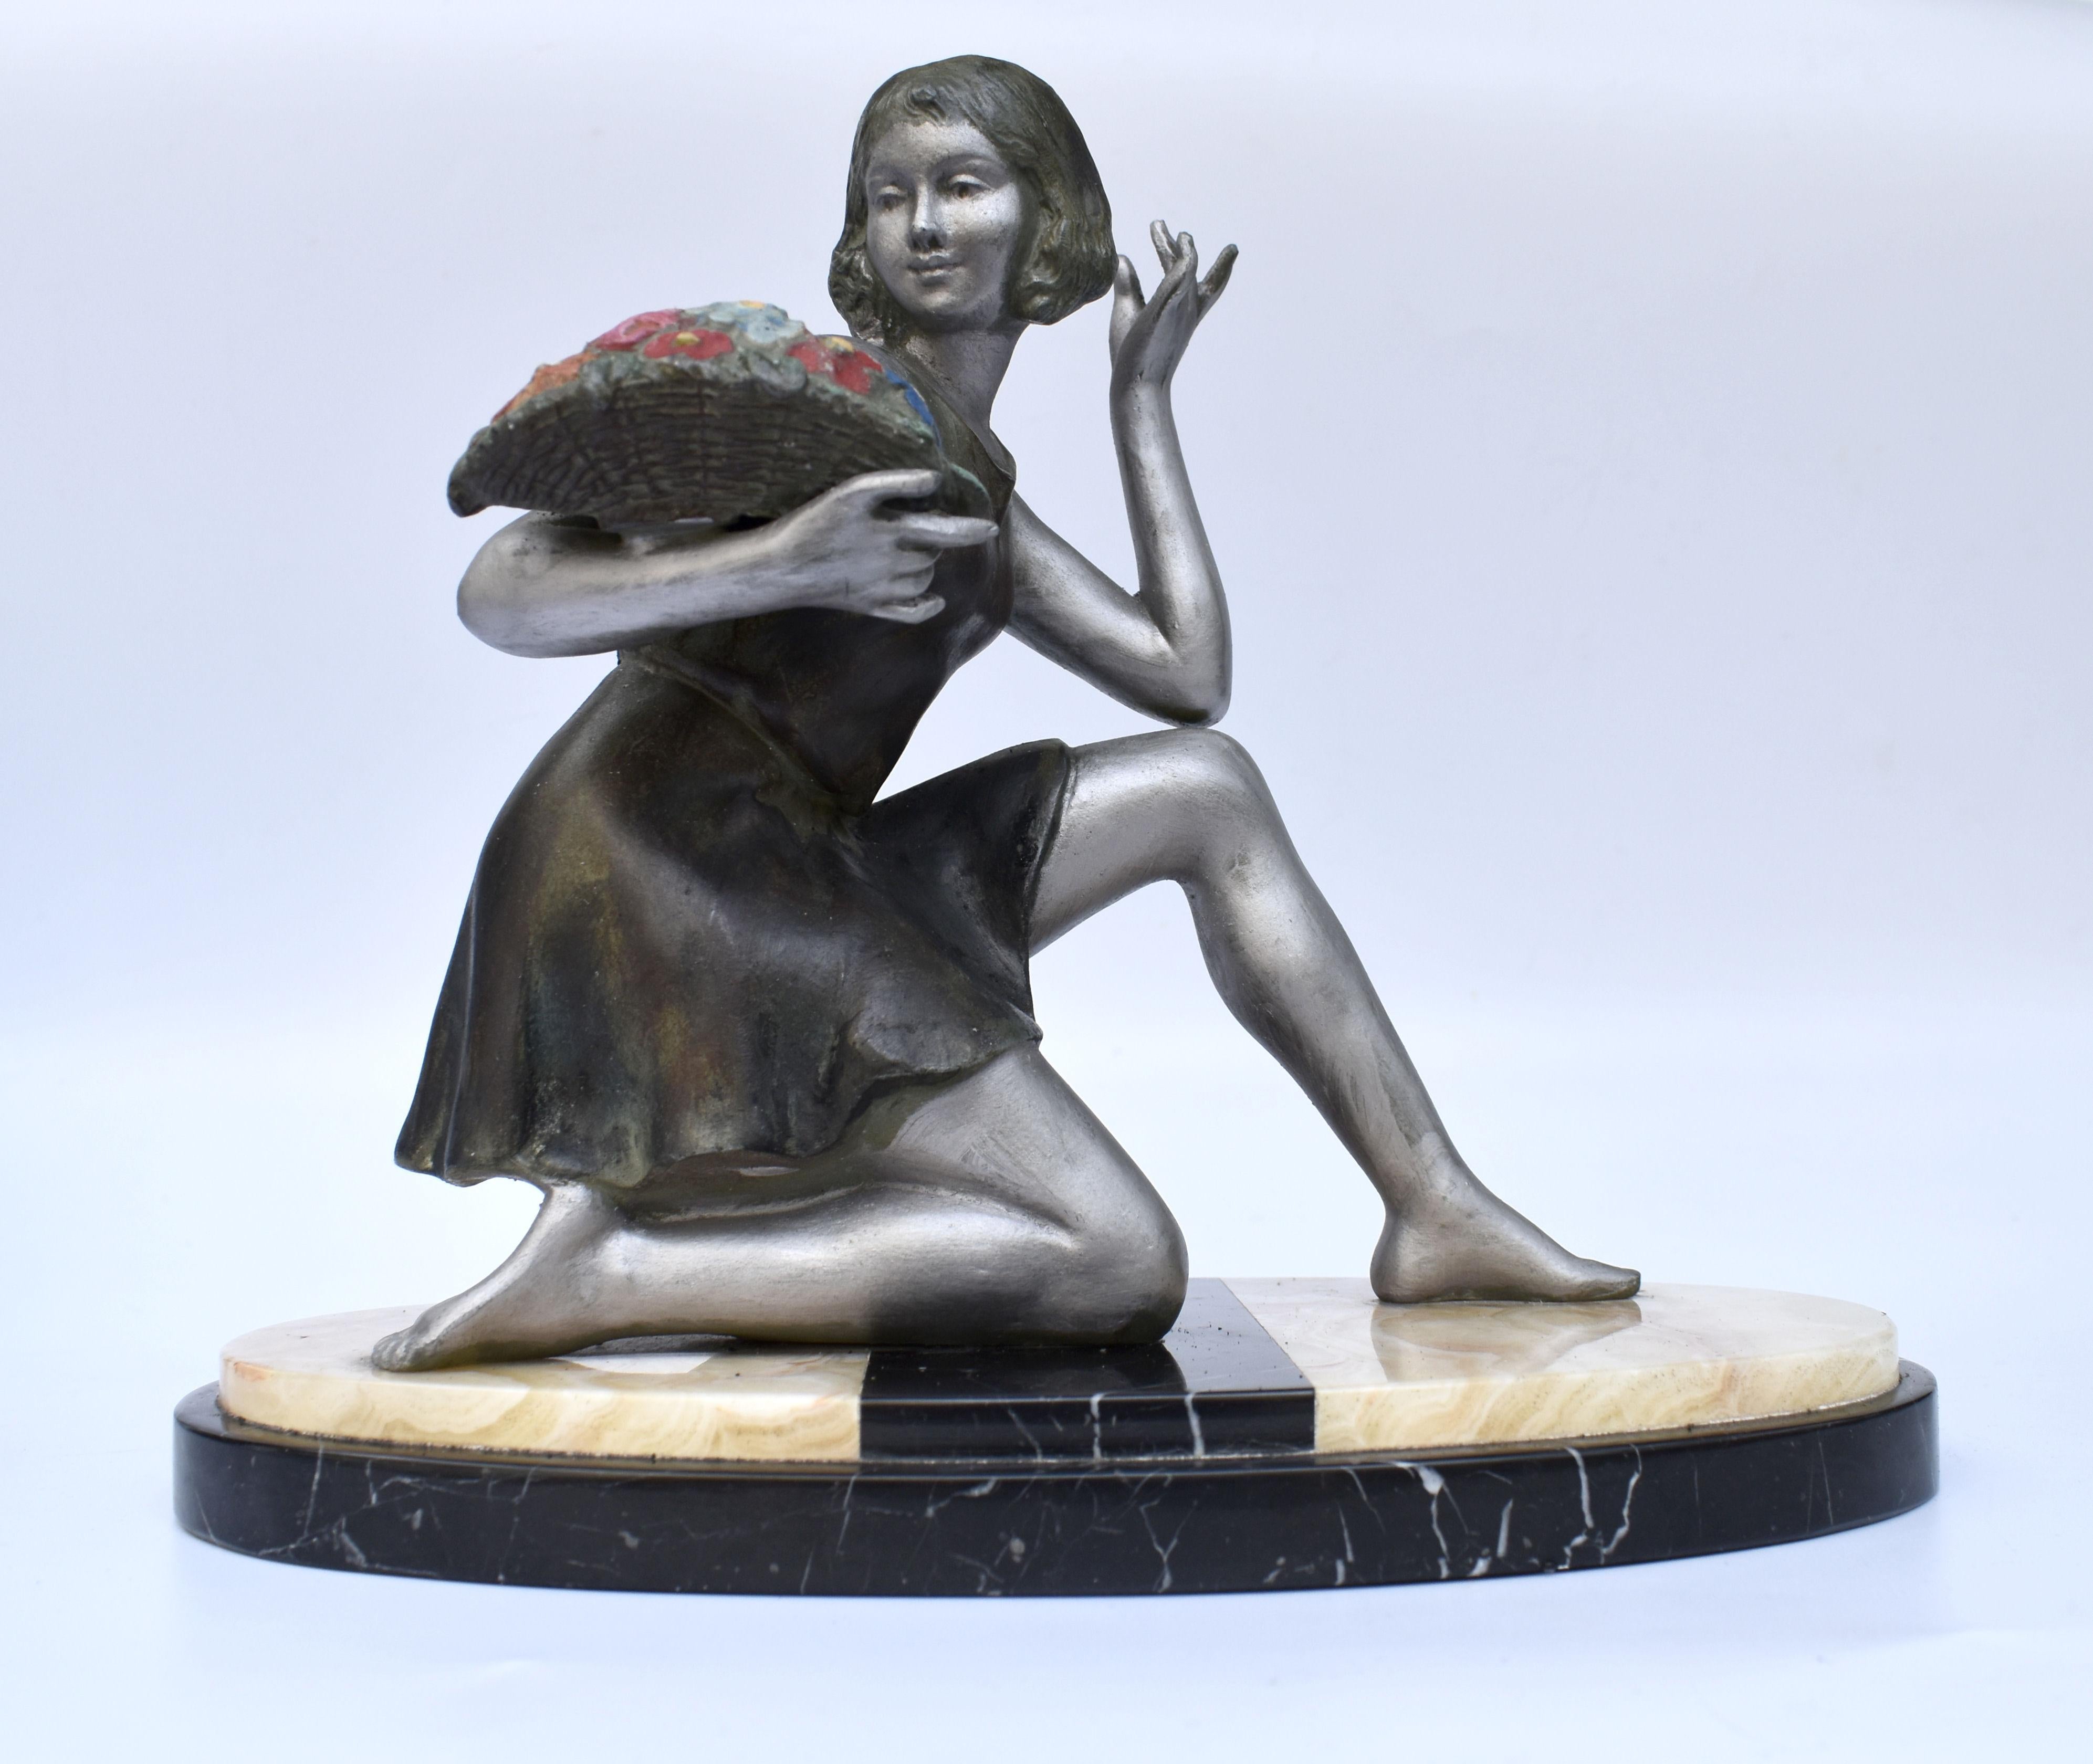 - Art Deco Geo Maxim female figure -
Delightful 1930s Art Deco French figure depicting a girl holding a basket of flowers in polychrome. The base is solid highly polished marble. Signed Geo Maxim. The piece is in Excellent condition with No damages